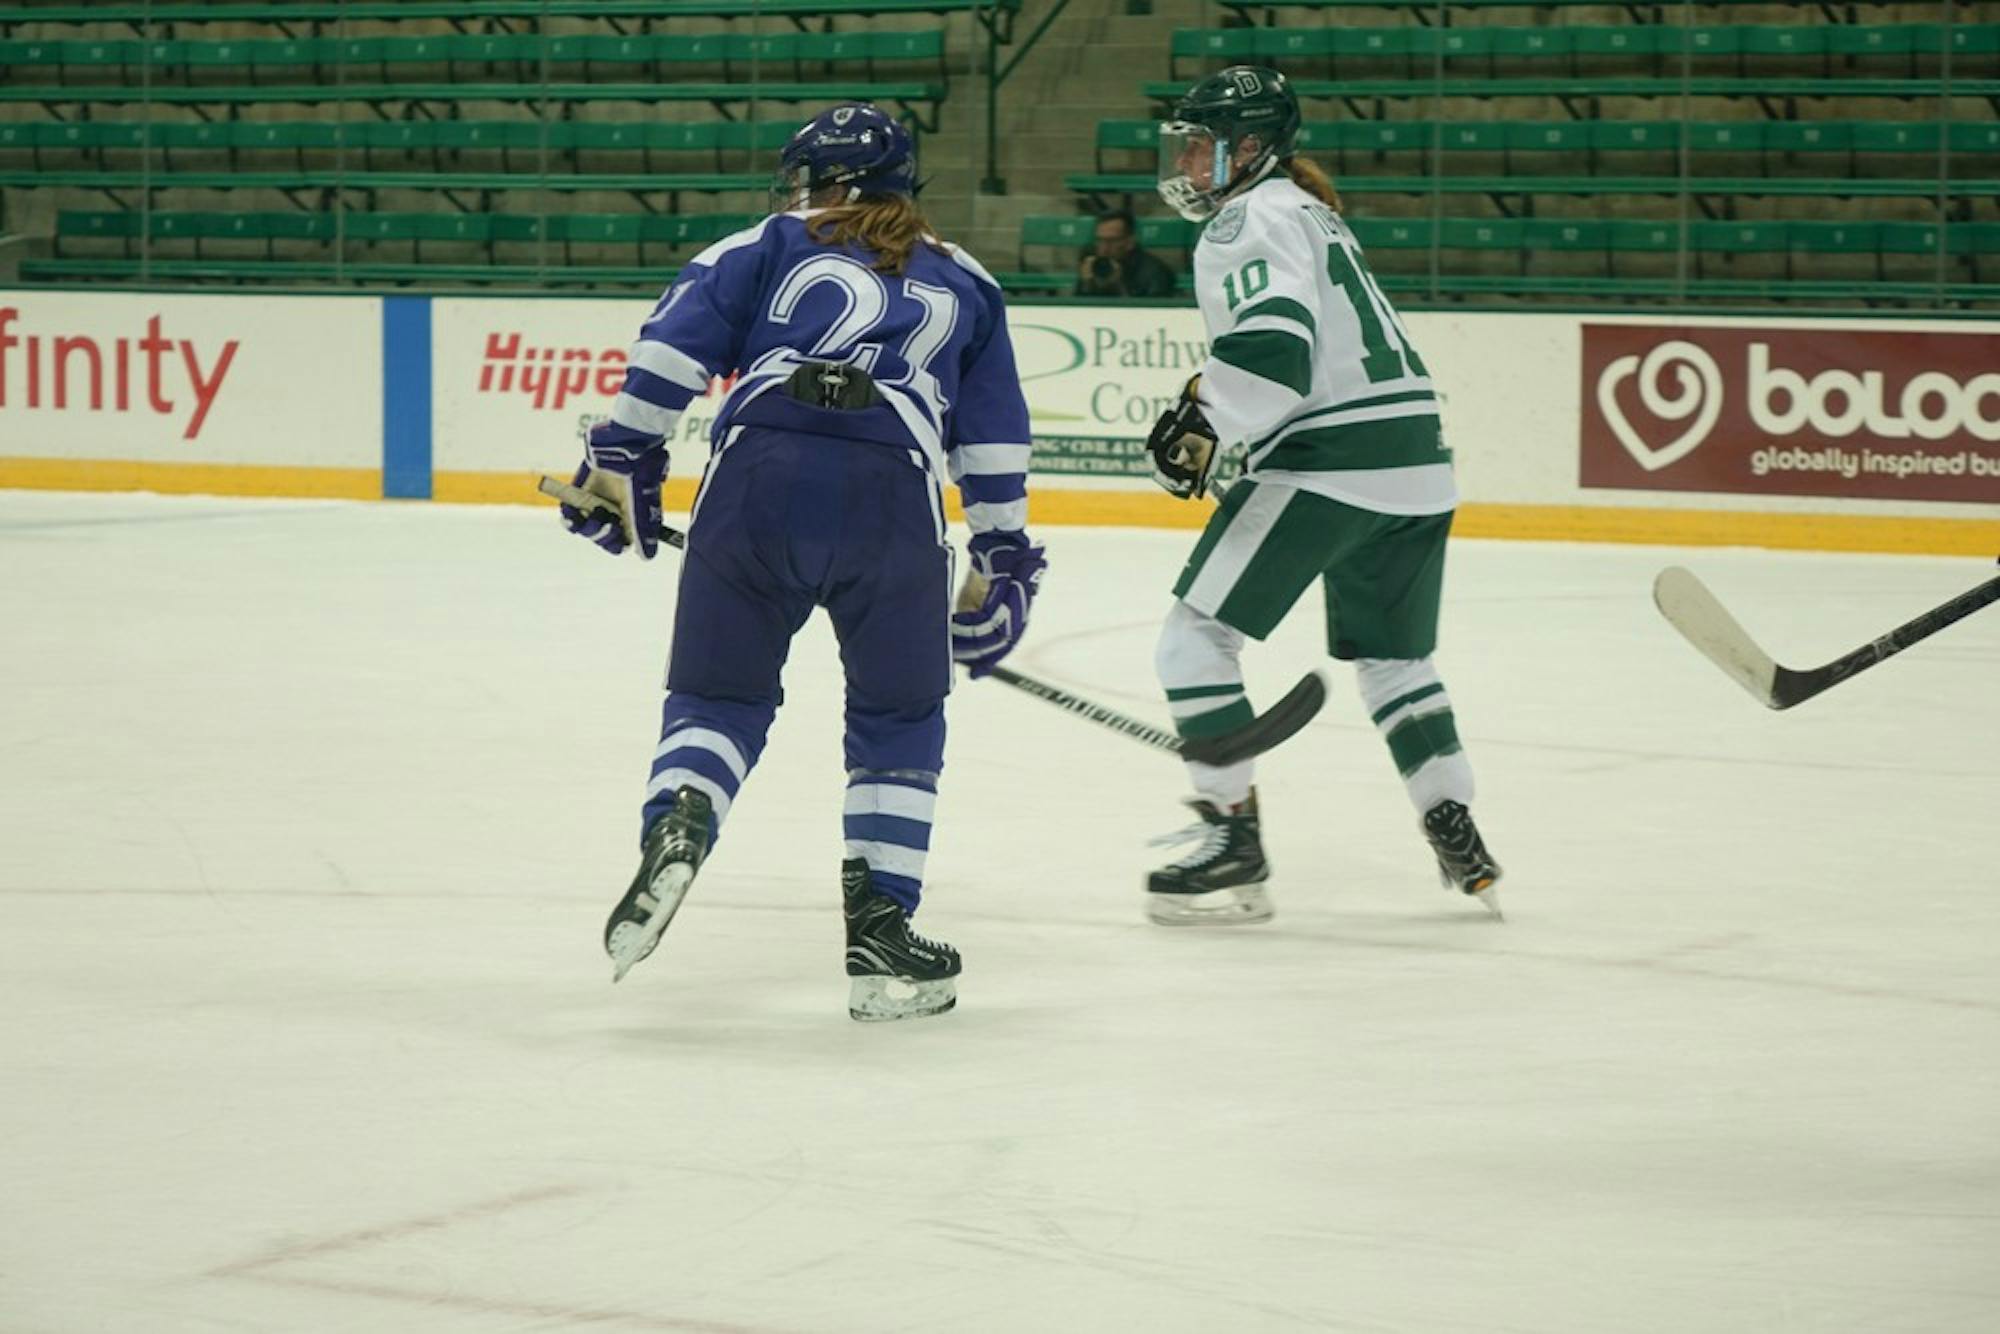 The women's ice hockey team looks to rebound from a 7-21 campaign which was one of its worst seasons in recent memory.